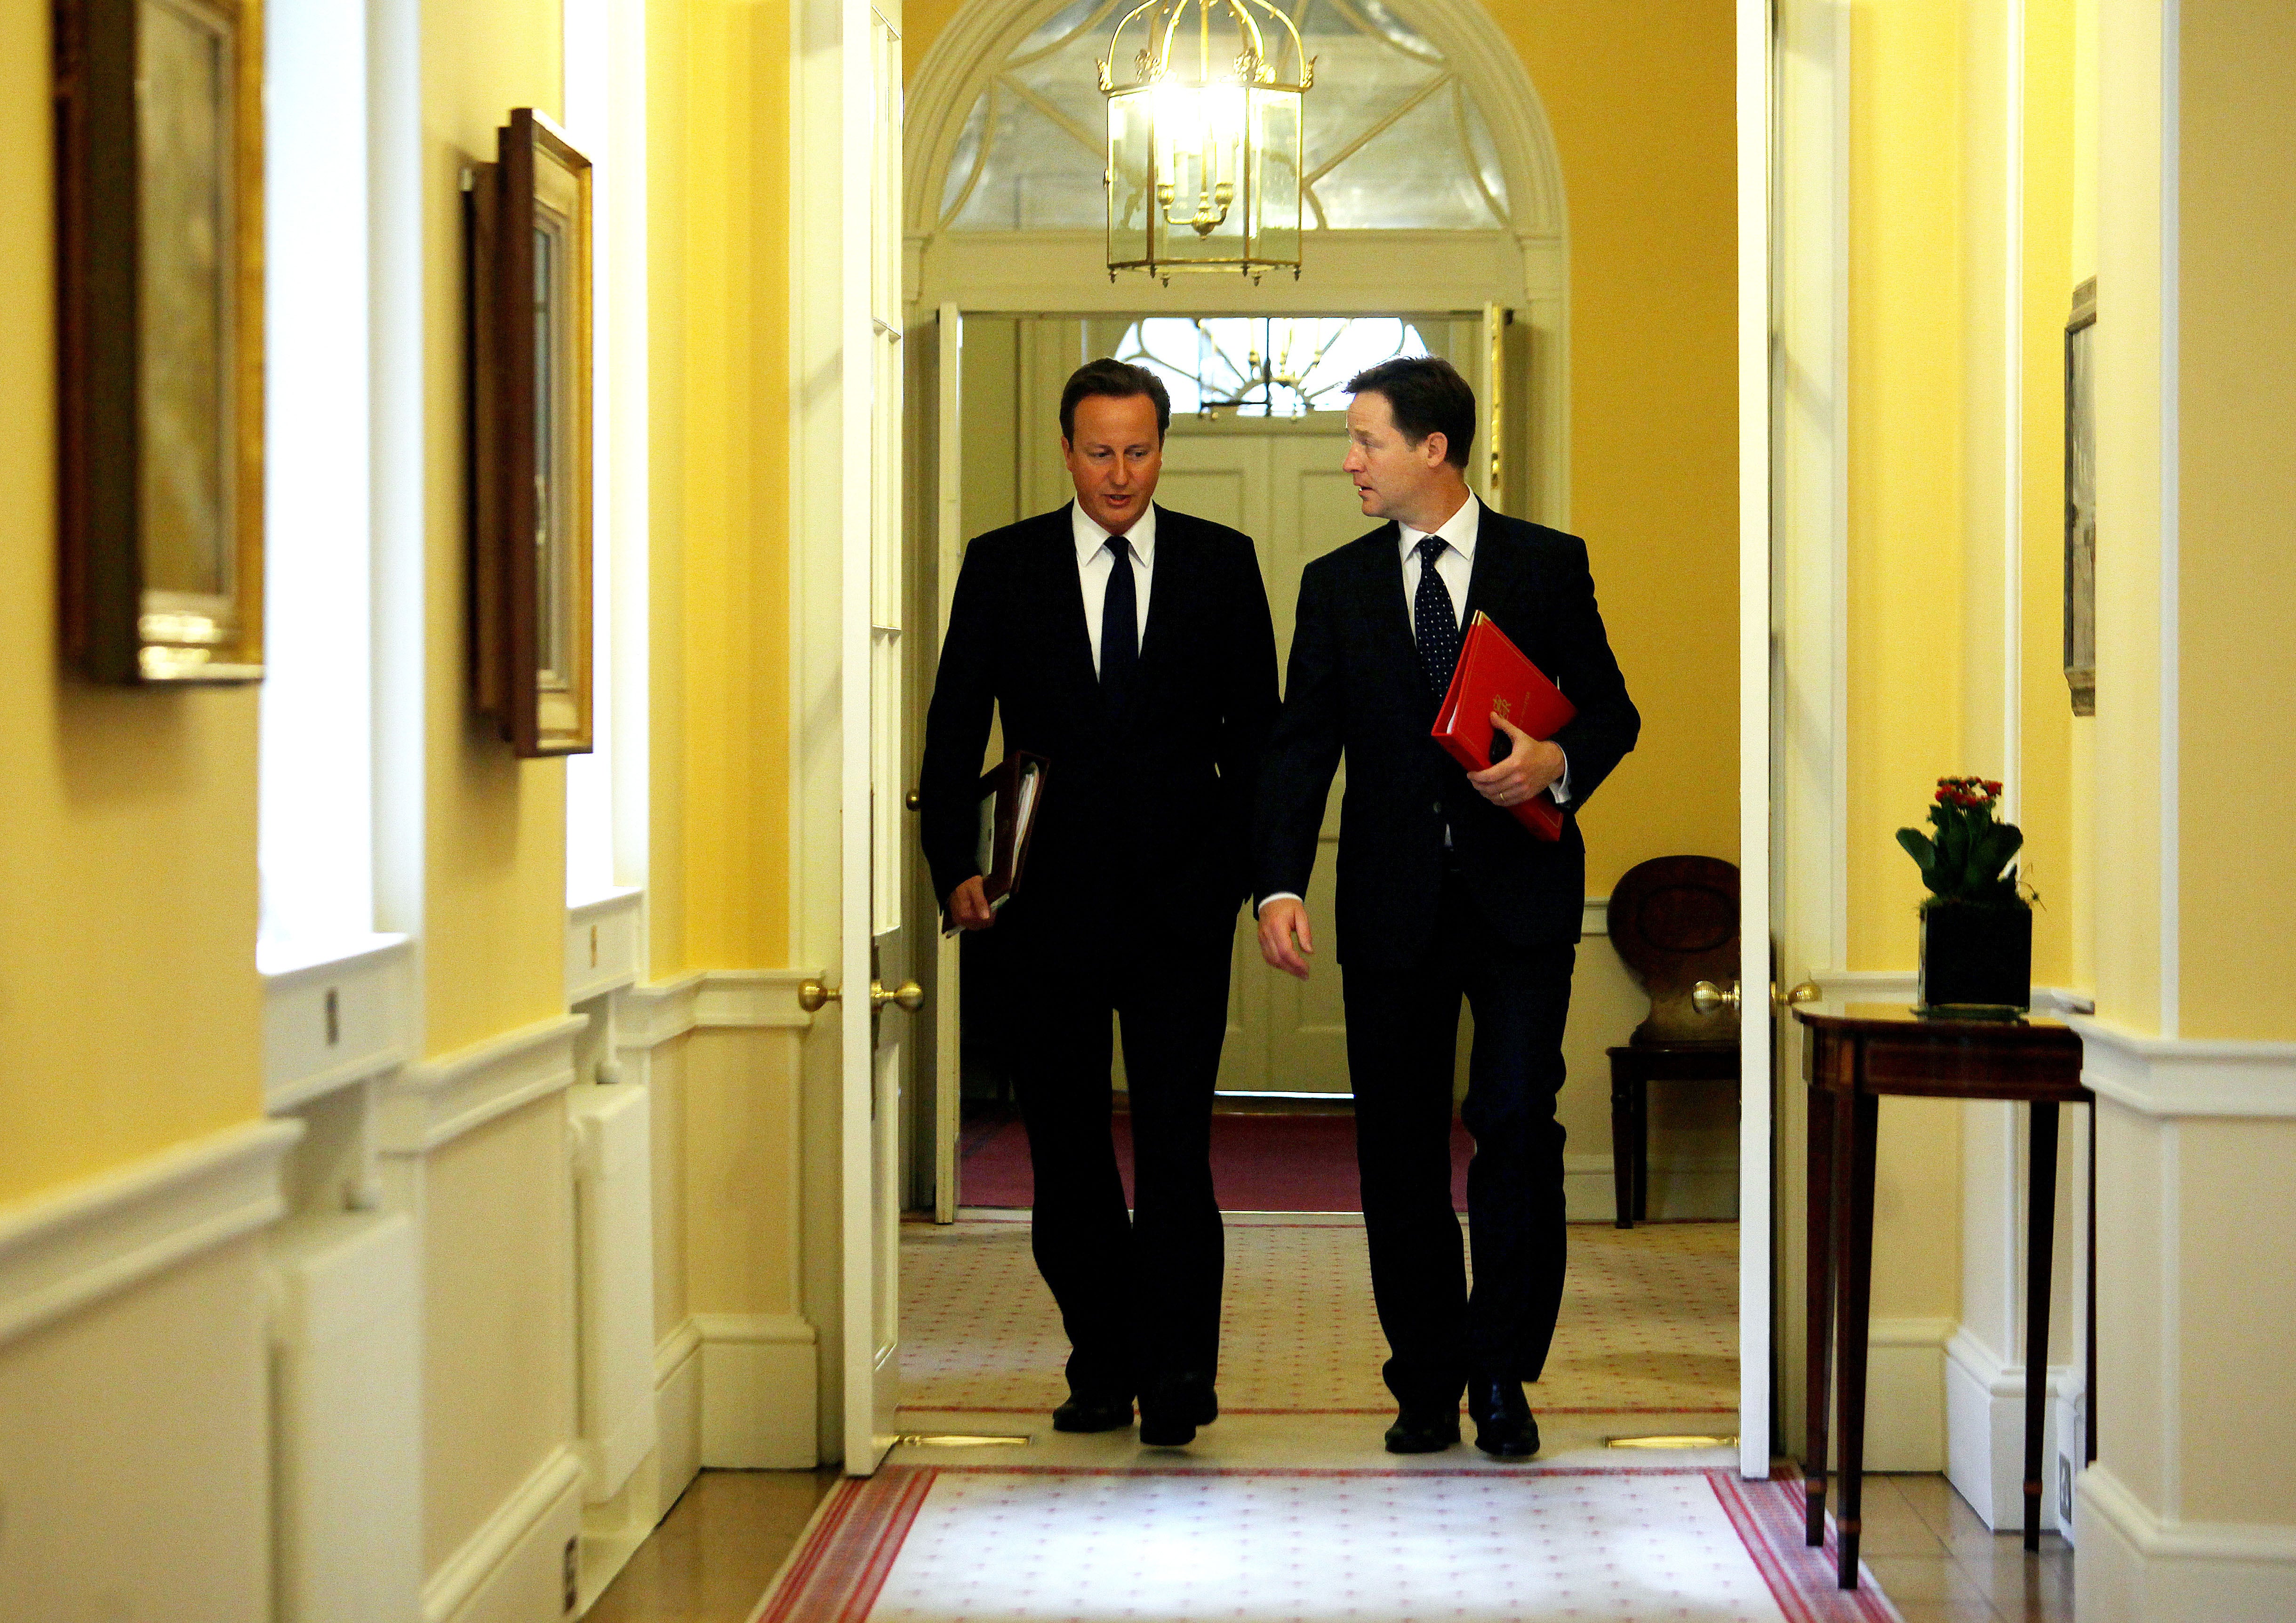 Cameron and Clegg arrive for their first cabinet meeting at Downing Street after the summer break